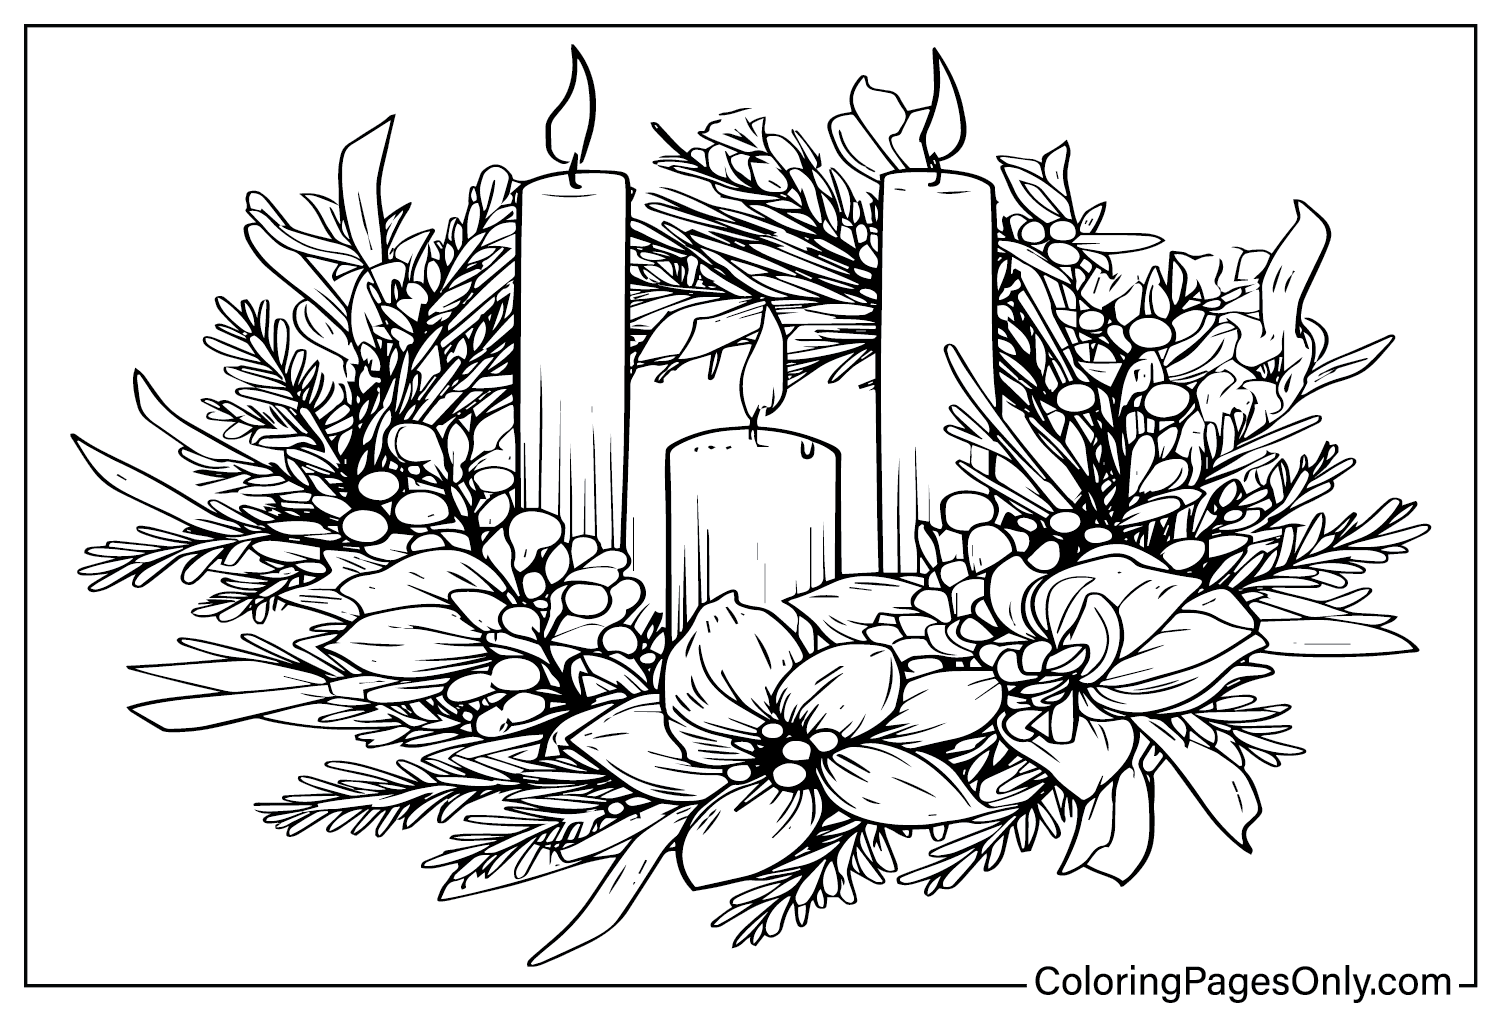 Coloring Page Advent Wreath from Advent Wreath